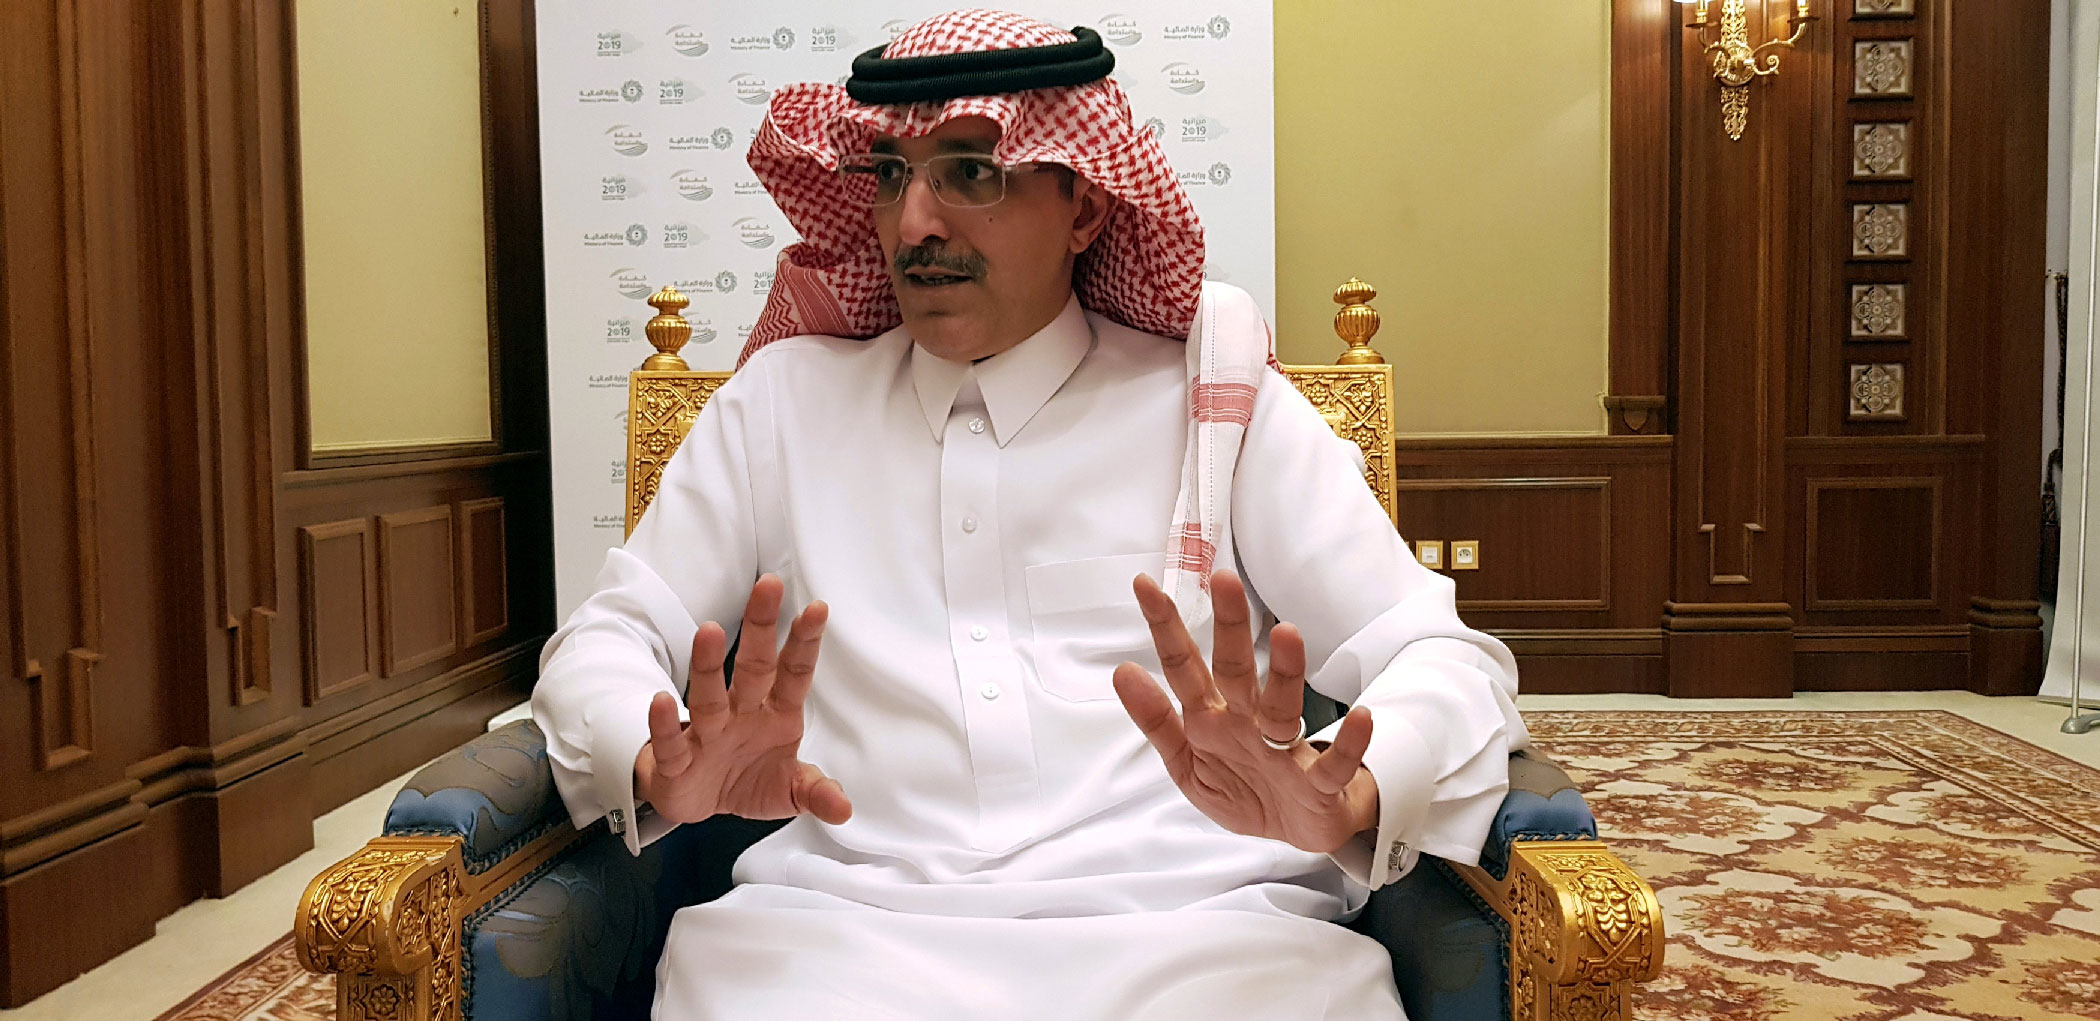 Saudi Minister of Finance Mohammed al-Jadaan speaks during an interview with Reuters at the Ritz-Carlton Hotel in Riyadh, Saudi Arabia, December 19, 2018.